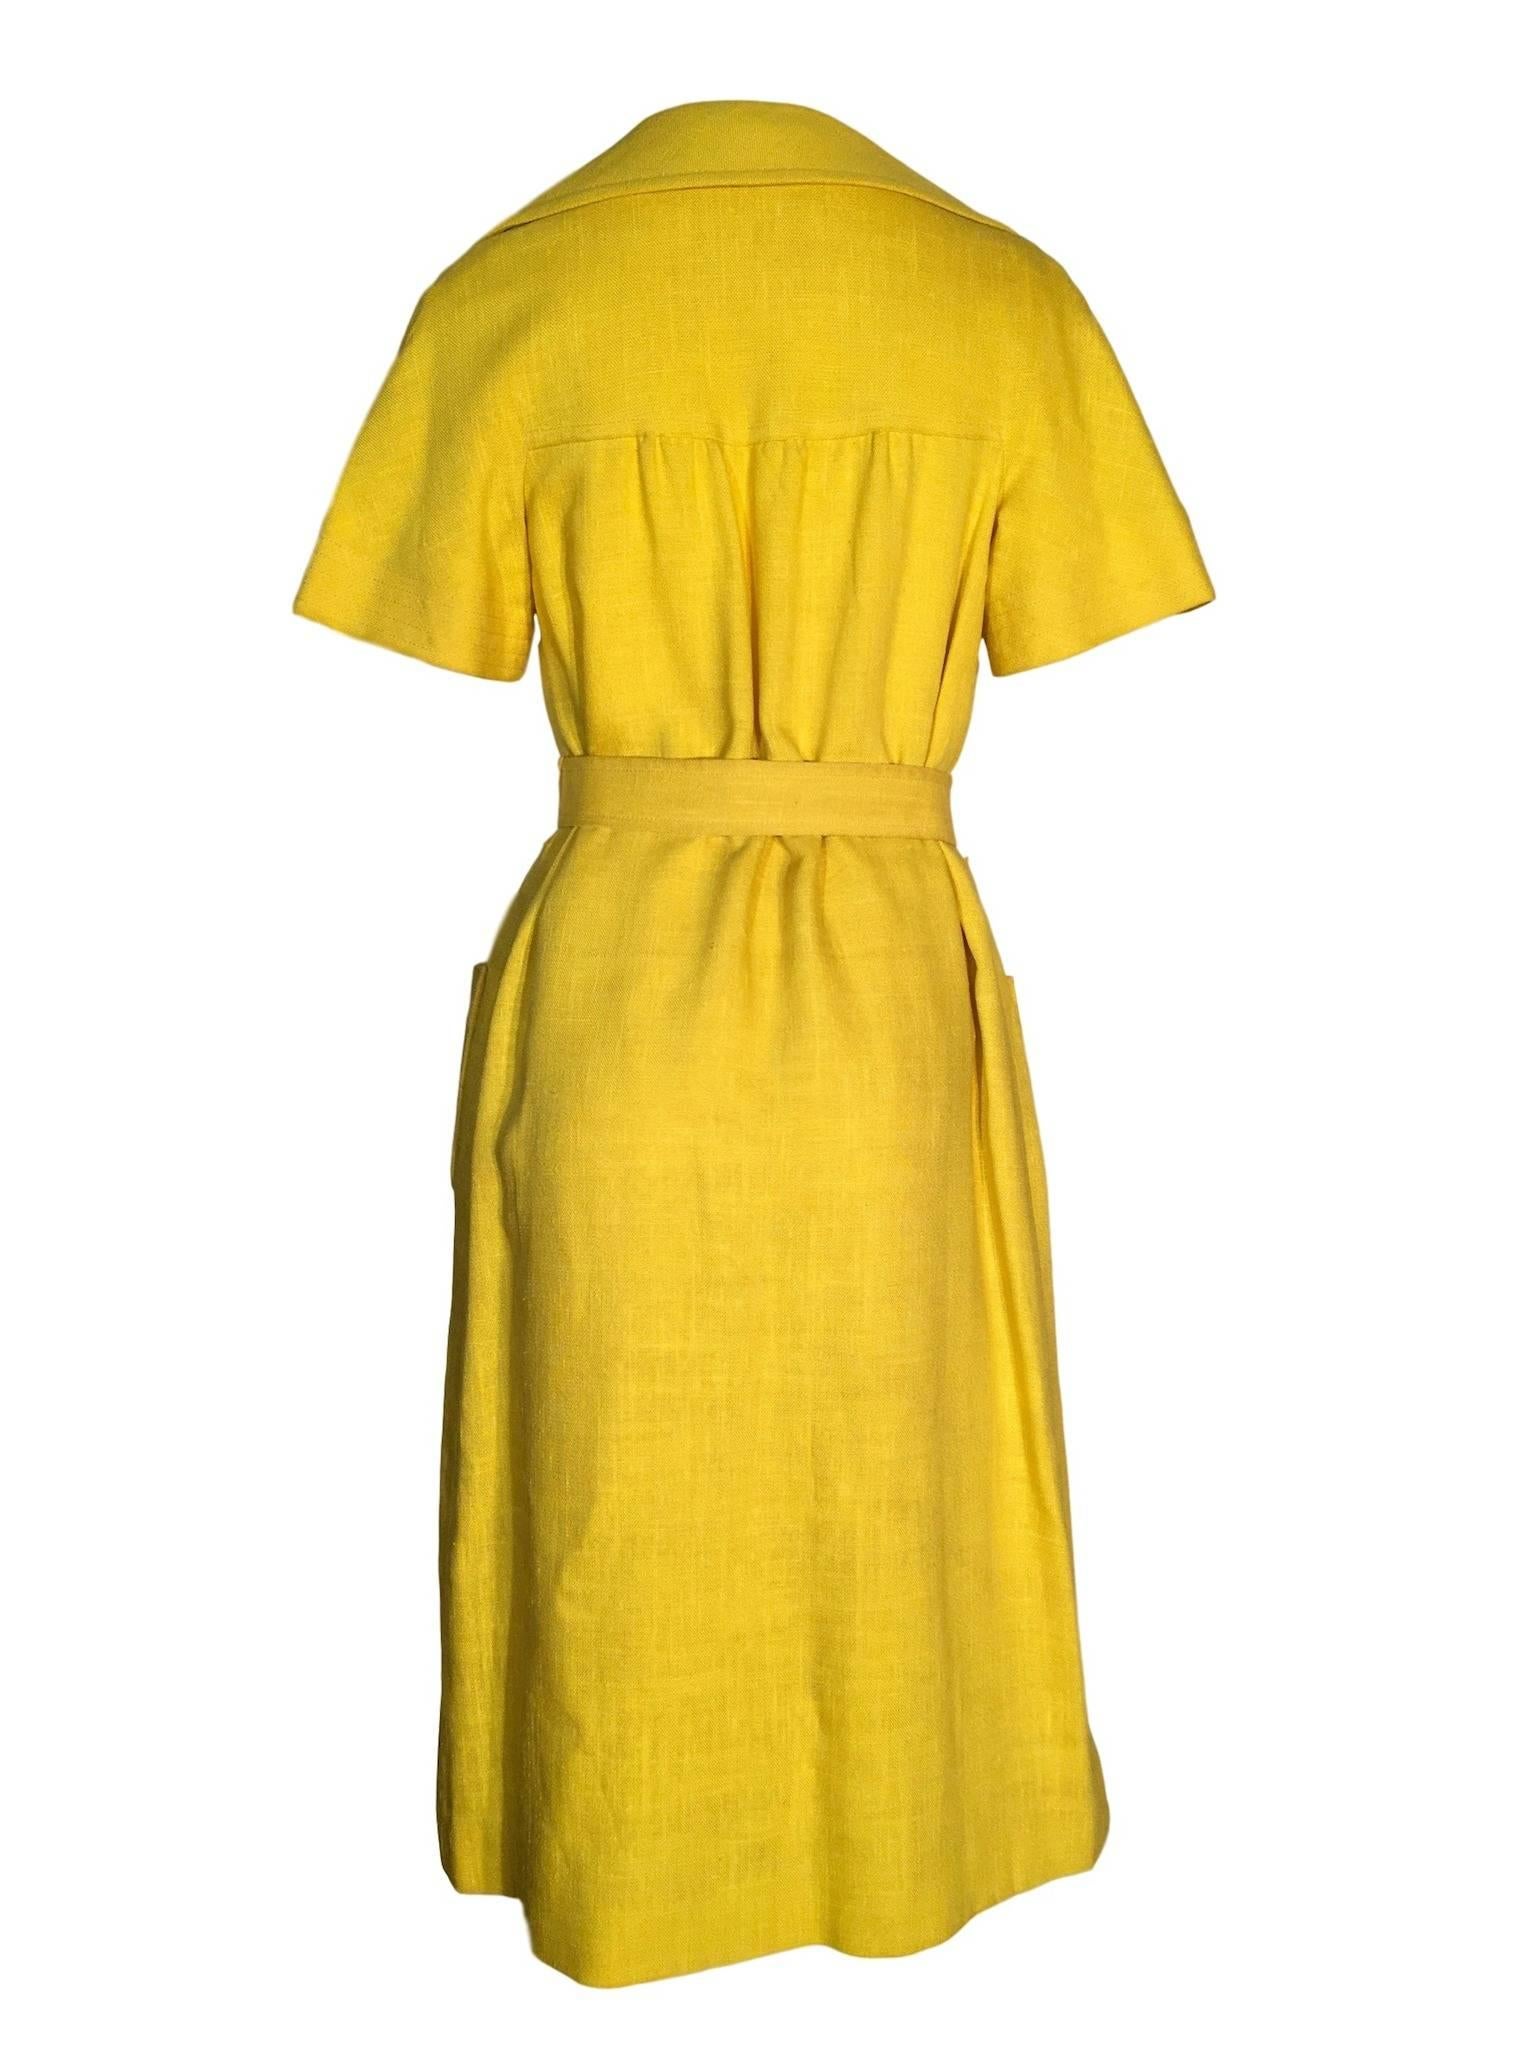 Very chic 1970s woven dress, made from a cotton or blend, By Mansfield for Harrods. Nice thick material, large pockets, button detail and original belt.

Size UK 14 Measures 21 inches across bust and 46 inches length